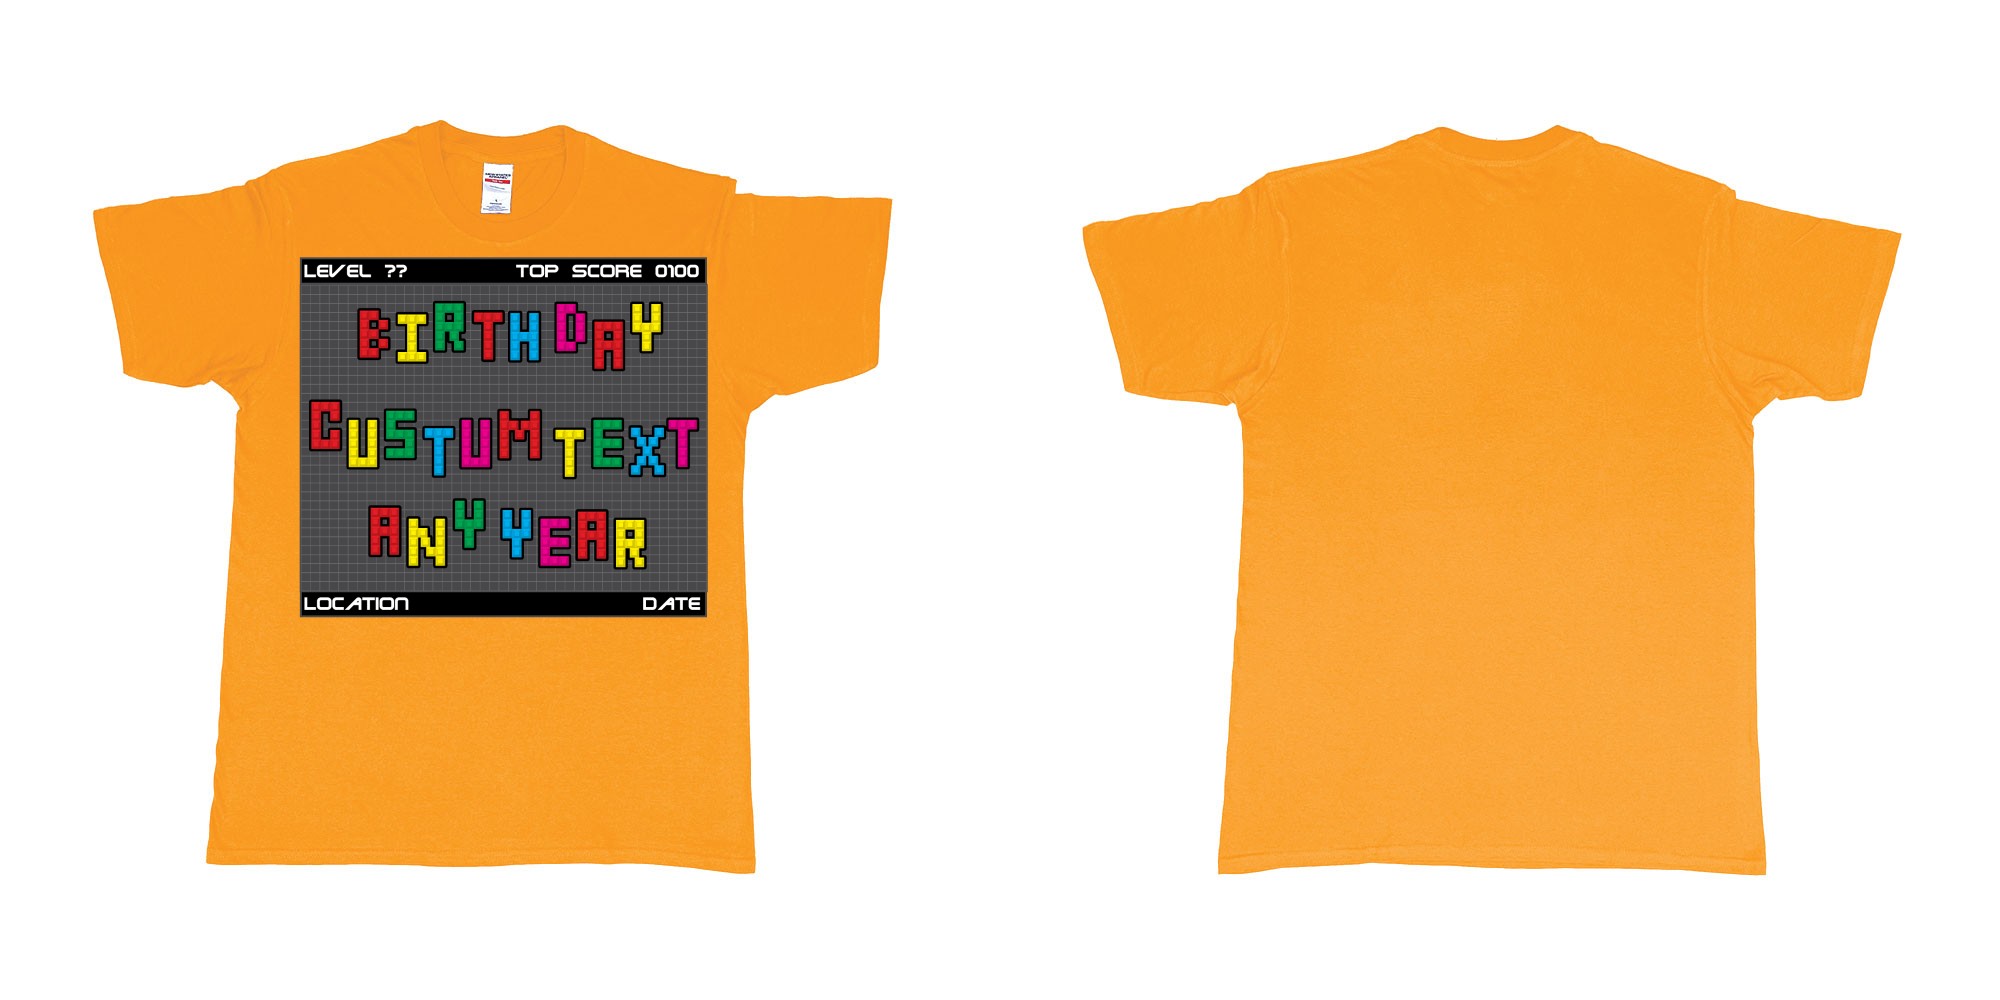 Custom tshirt design tetris block custom text birthday in fabric color gold choice your own text made in Bali by The Pirate Way